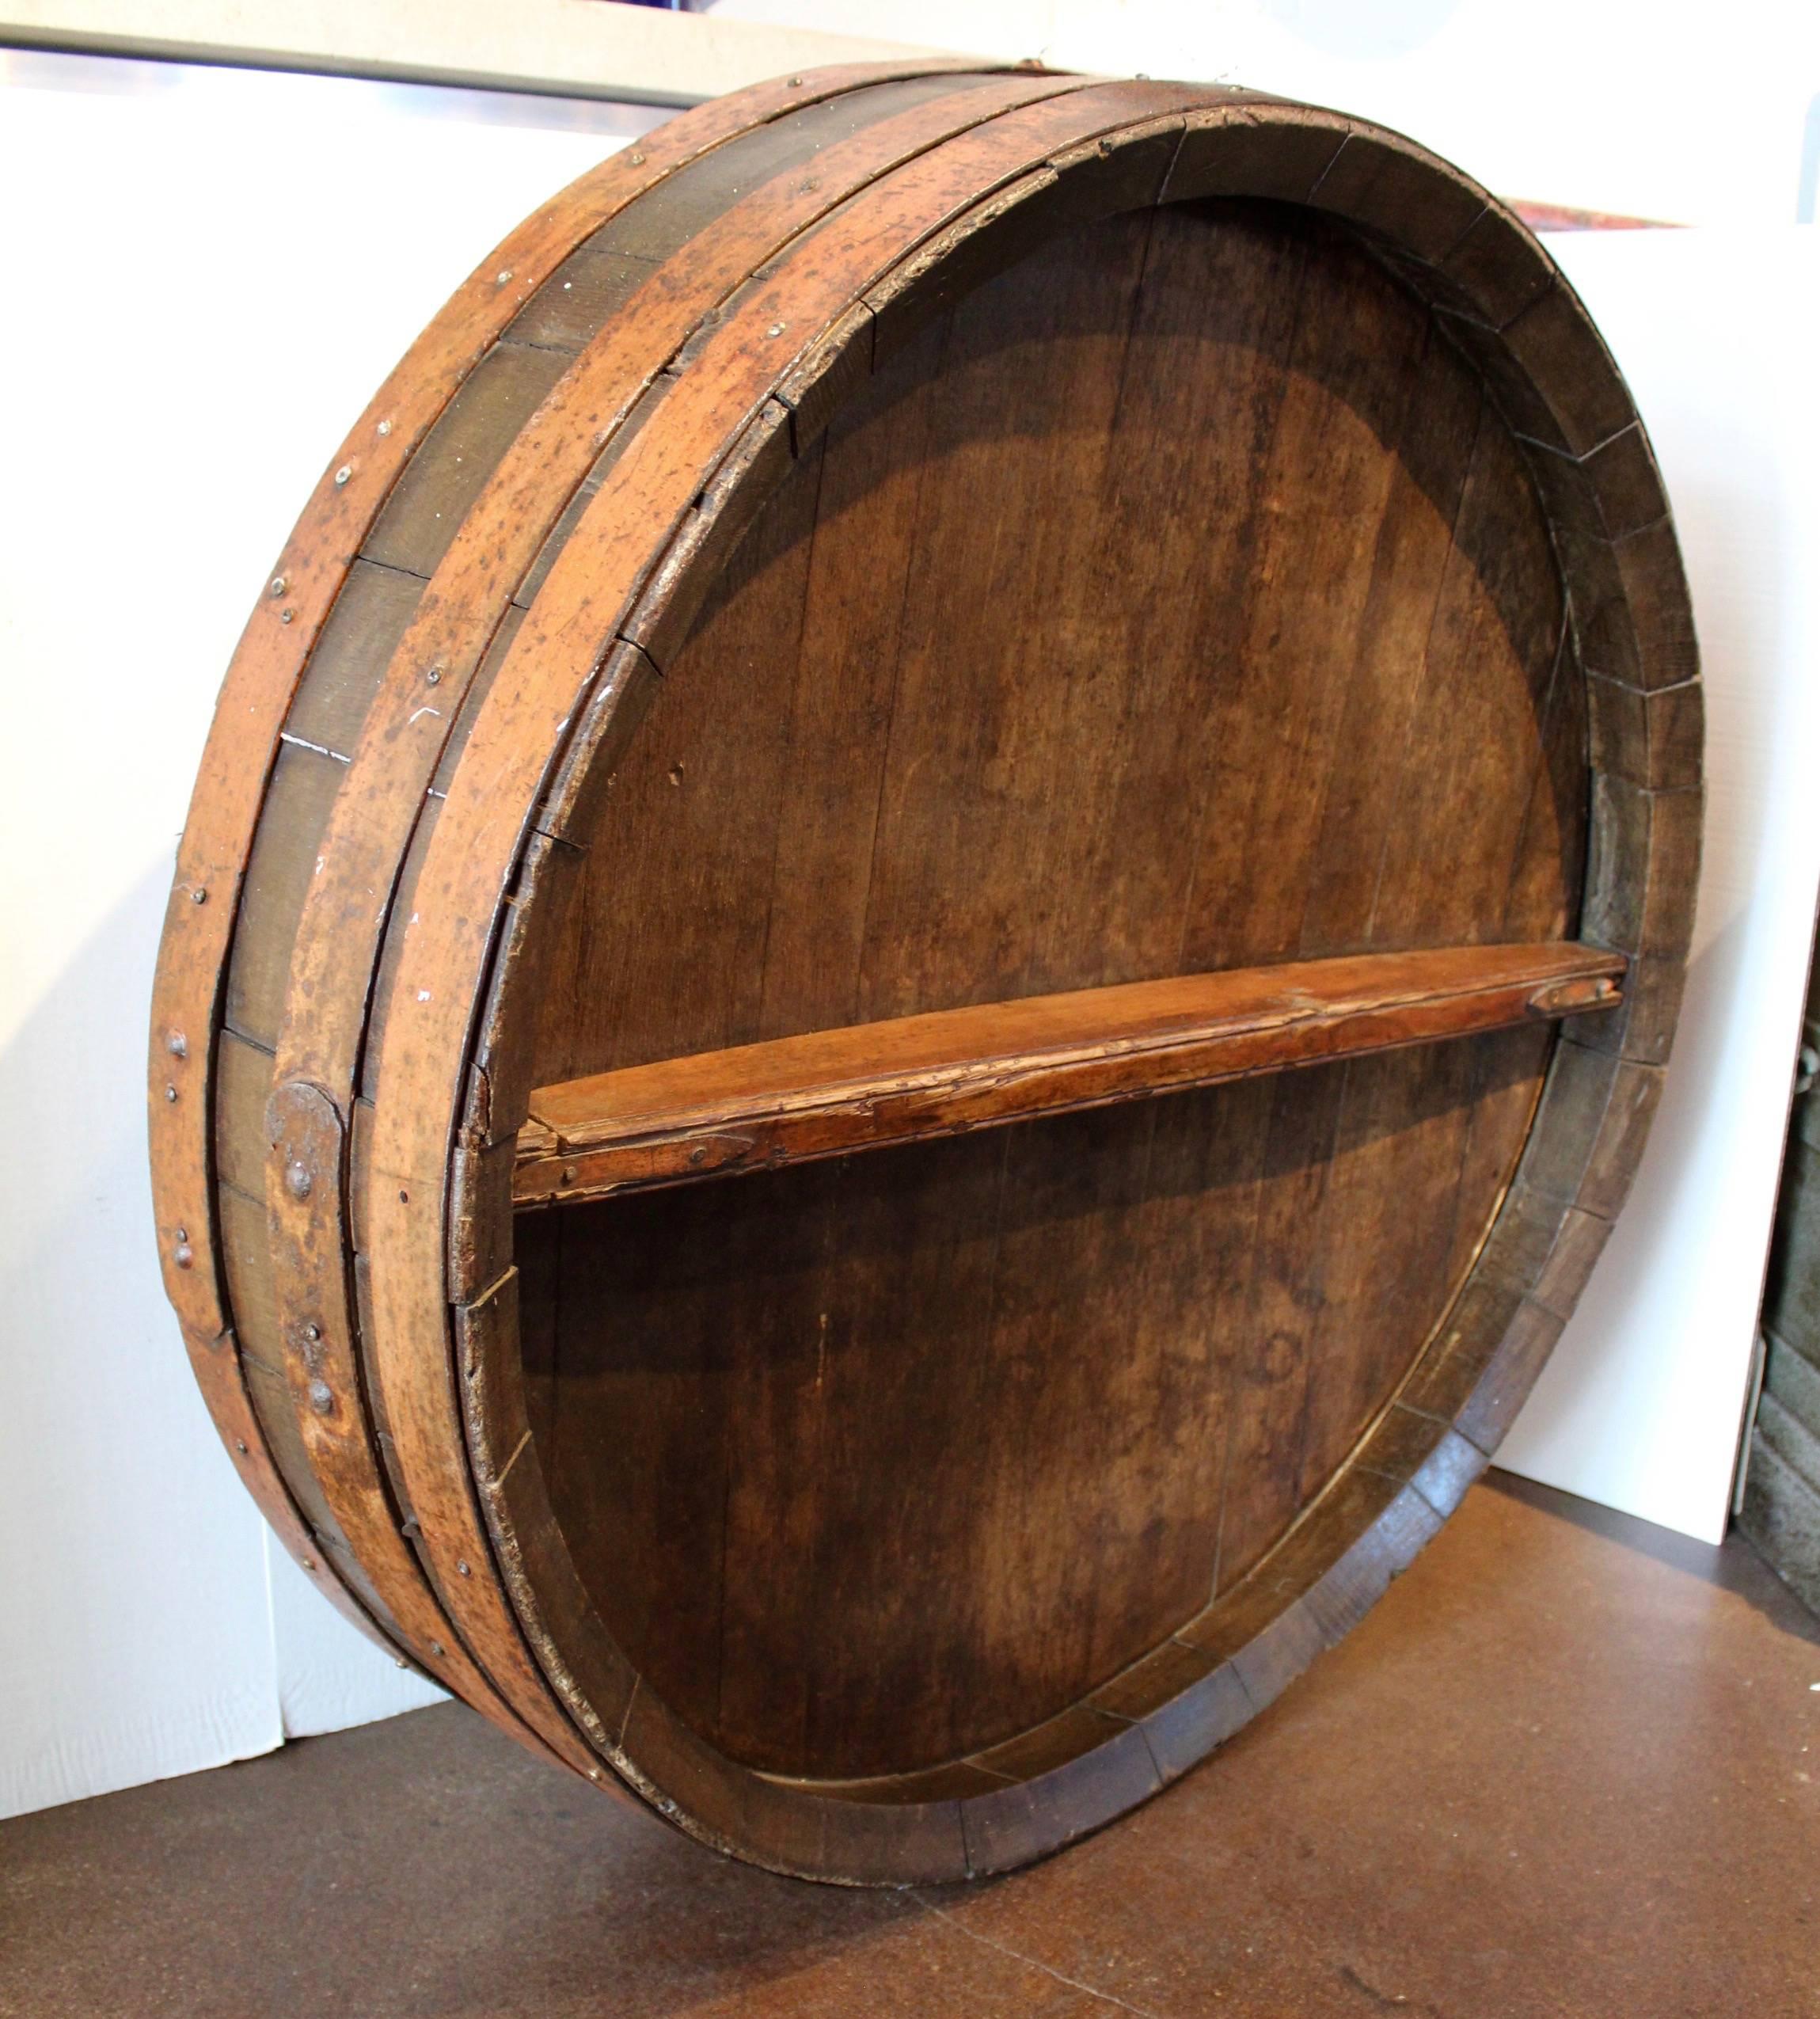 Antique French iron banded orange wine barrel as wall decor, circa 1880.
Original distressed orange patina on iron banded wine cask.
Primitive dark wood antique brown natural patina. 
Wine cask face is from Normandy, known for their white wines: